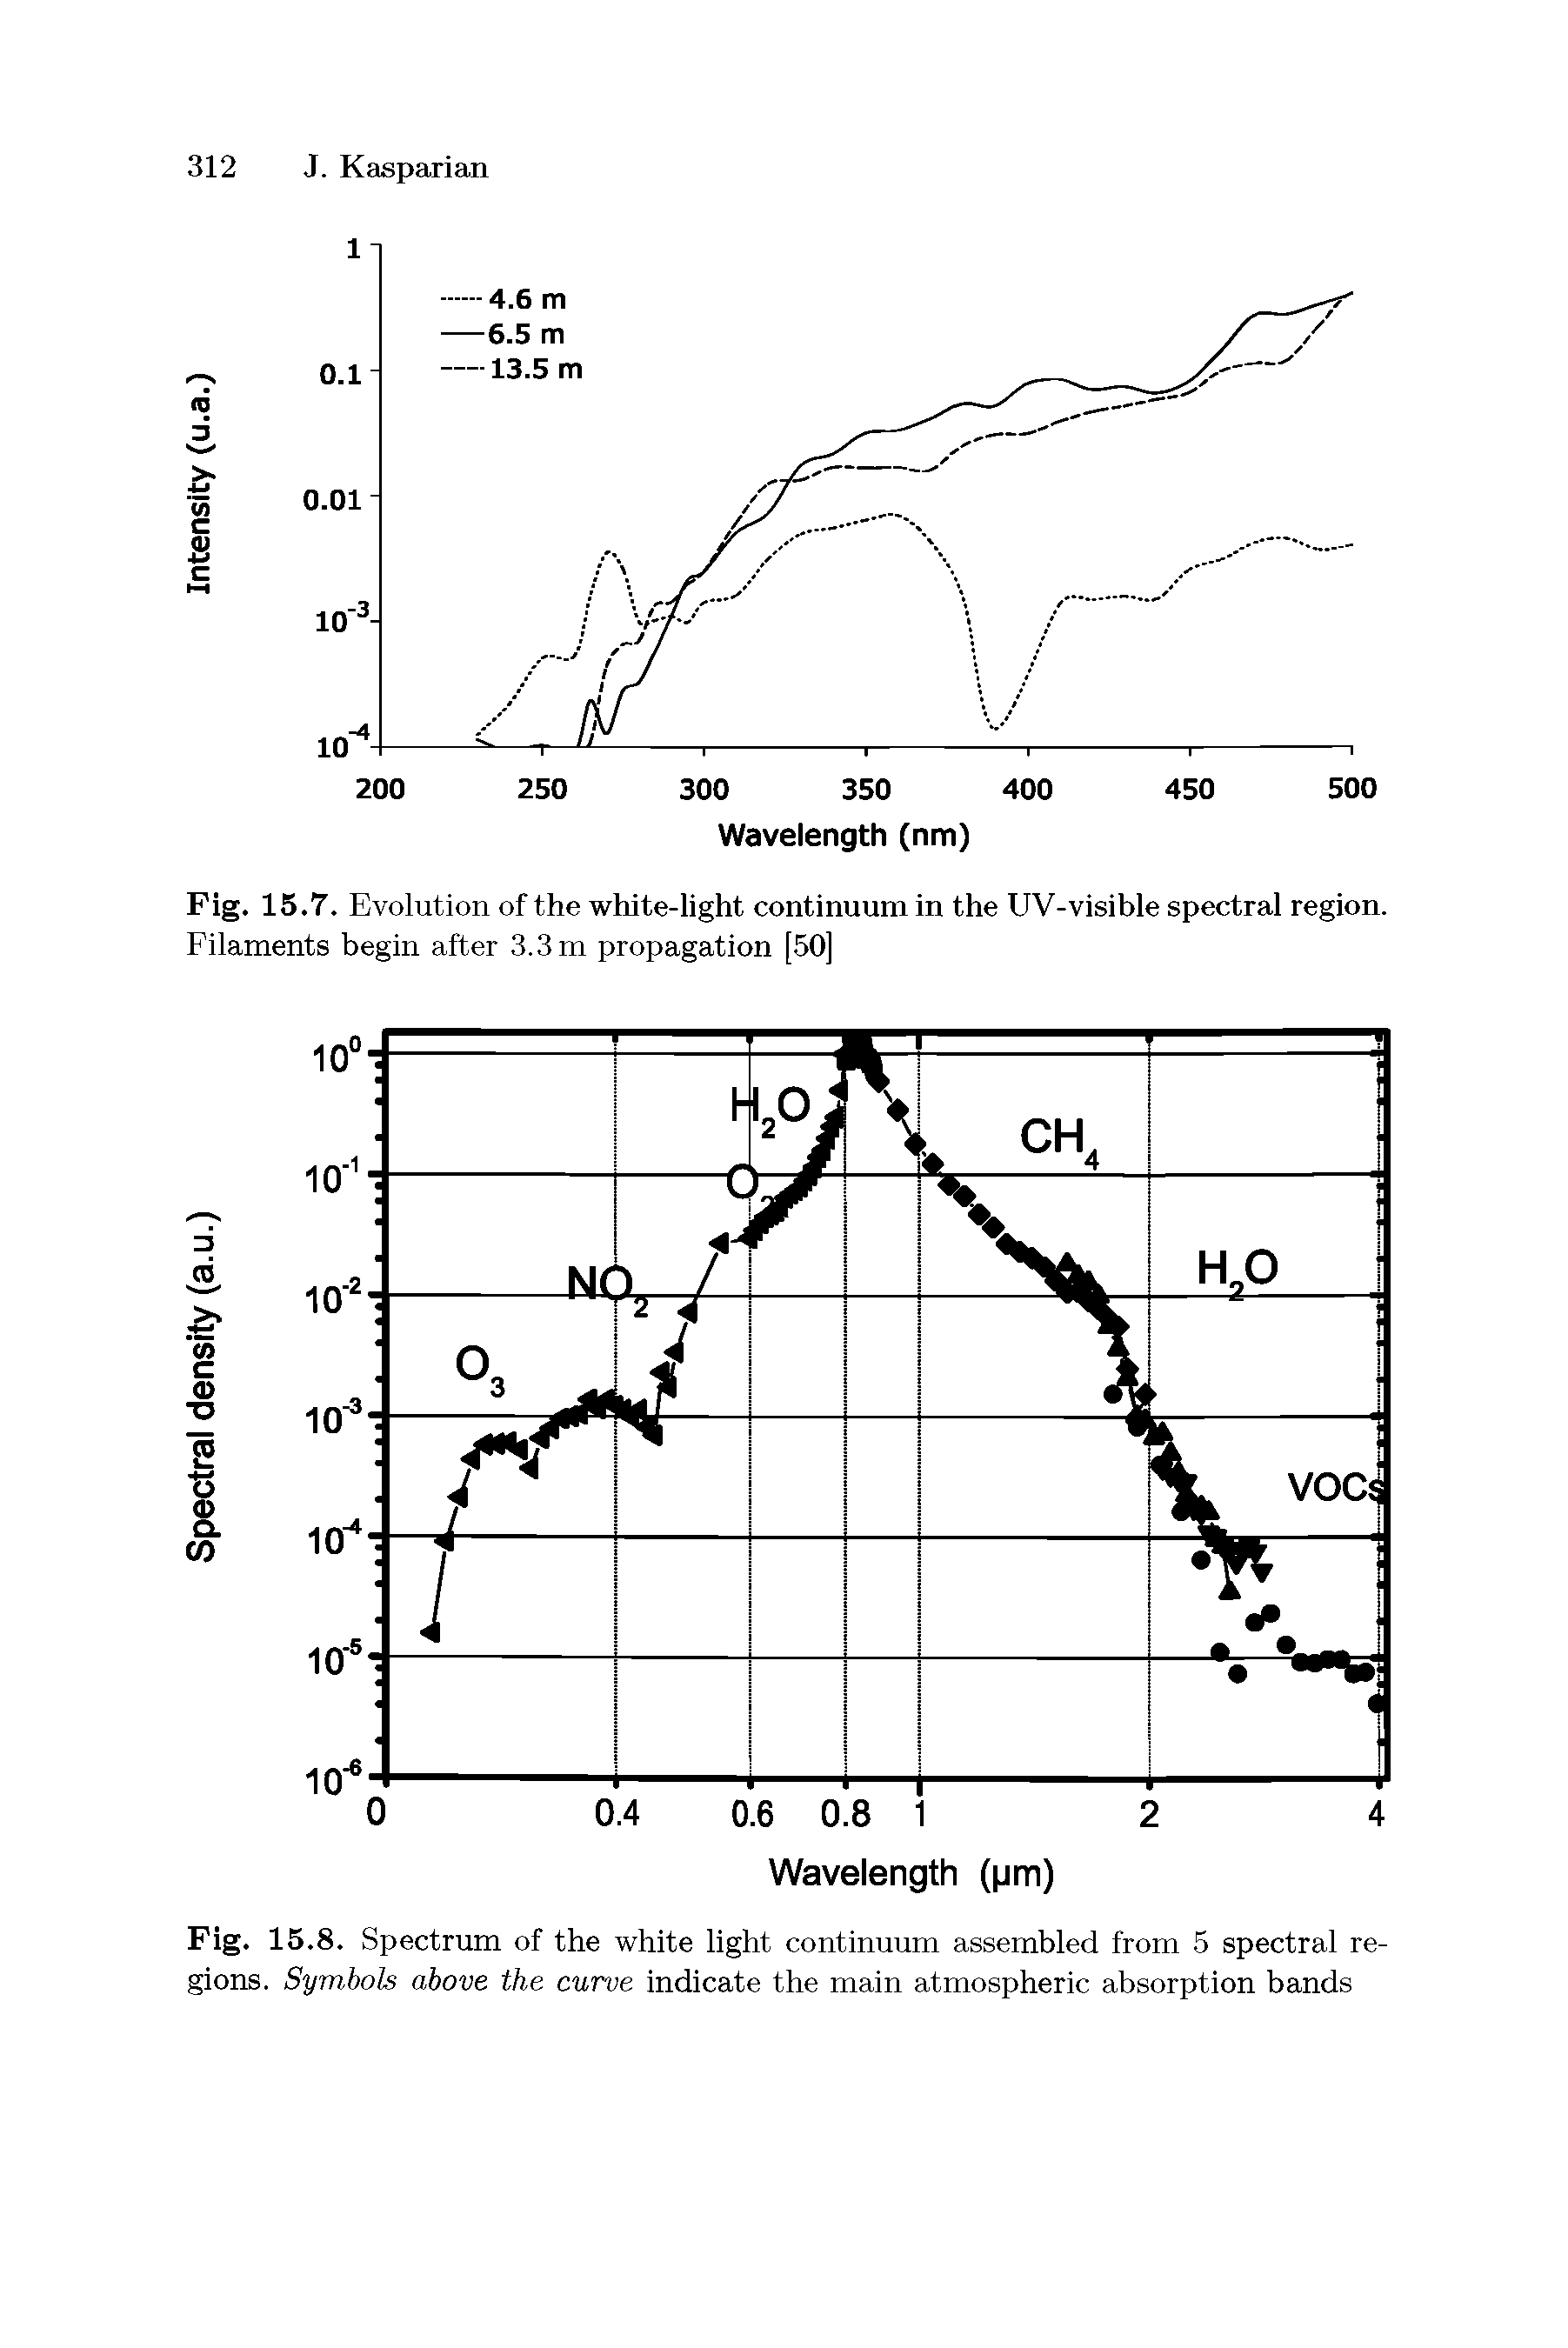 Fig. 15.8. Spectrum of the white light continuum assembled from 5 spectral regions. Symbols above the curve indicate the main atmospheric absorption bands...